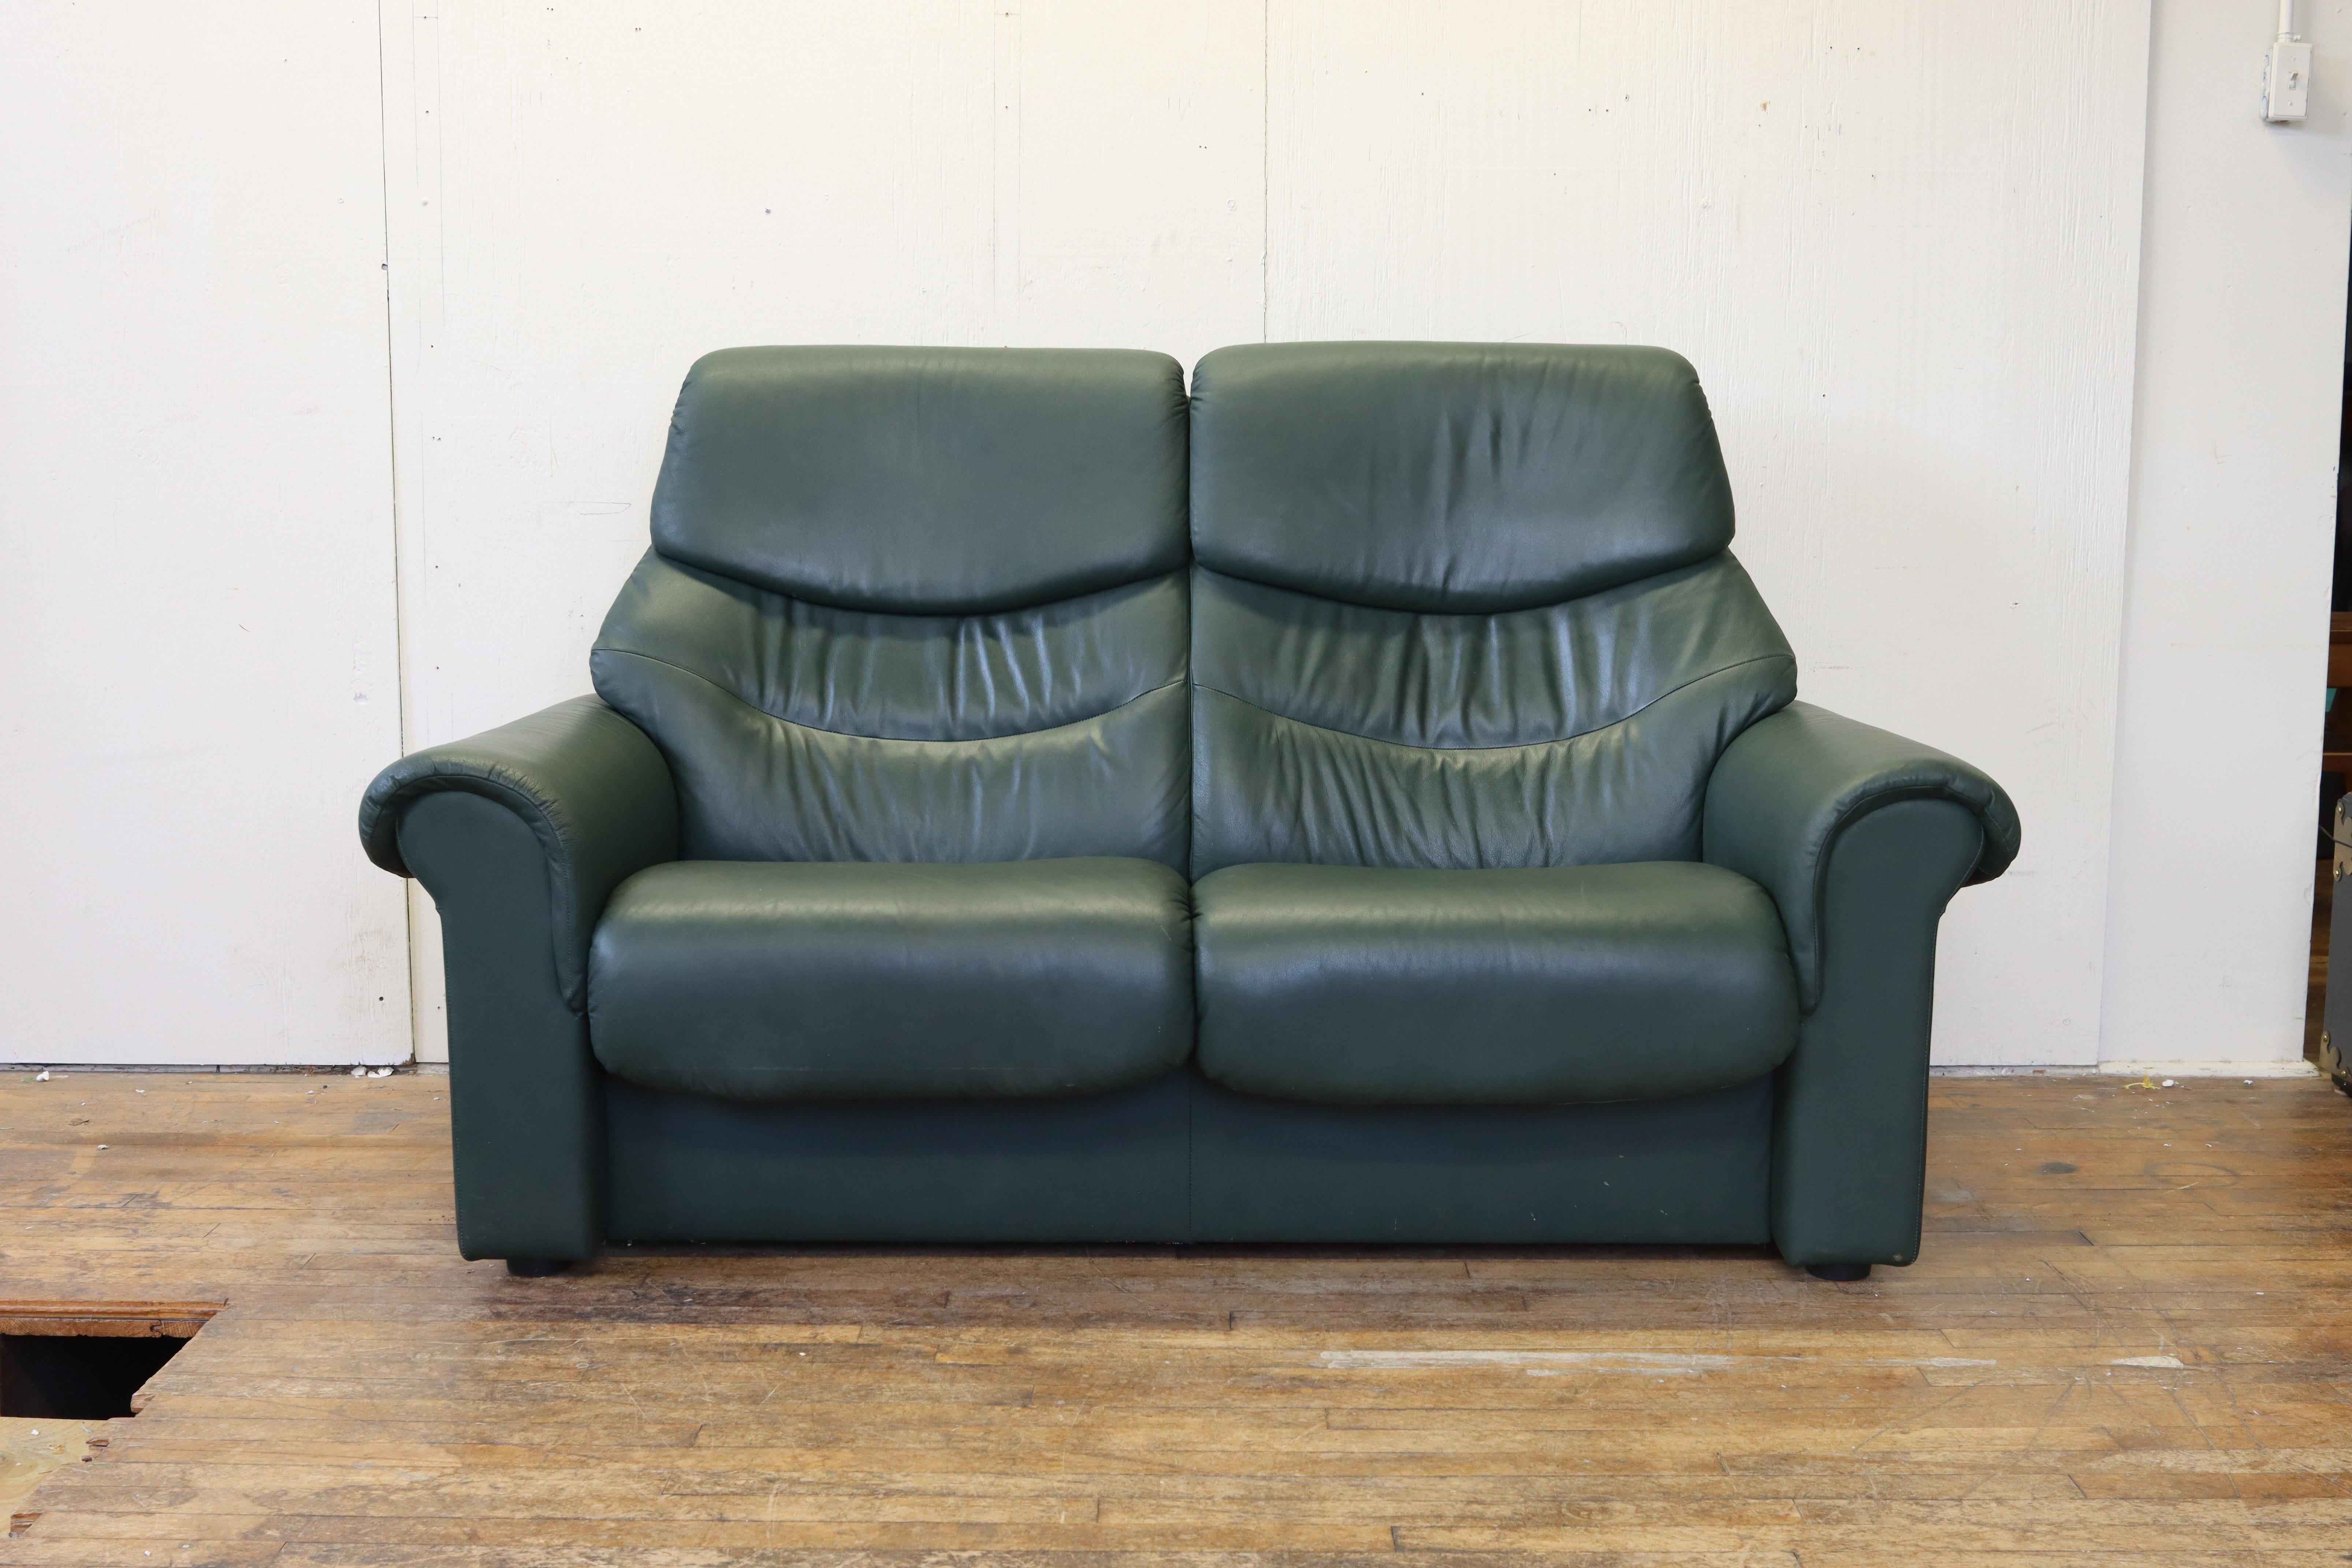 Add some top level comfort to your space with this reclining leather loveseat by Ekornes Stressless of Norway. Ekornes has developed a cult following over the decades for the comfort and quality of their furniture and this piece is no exception.